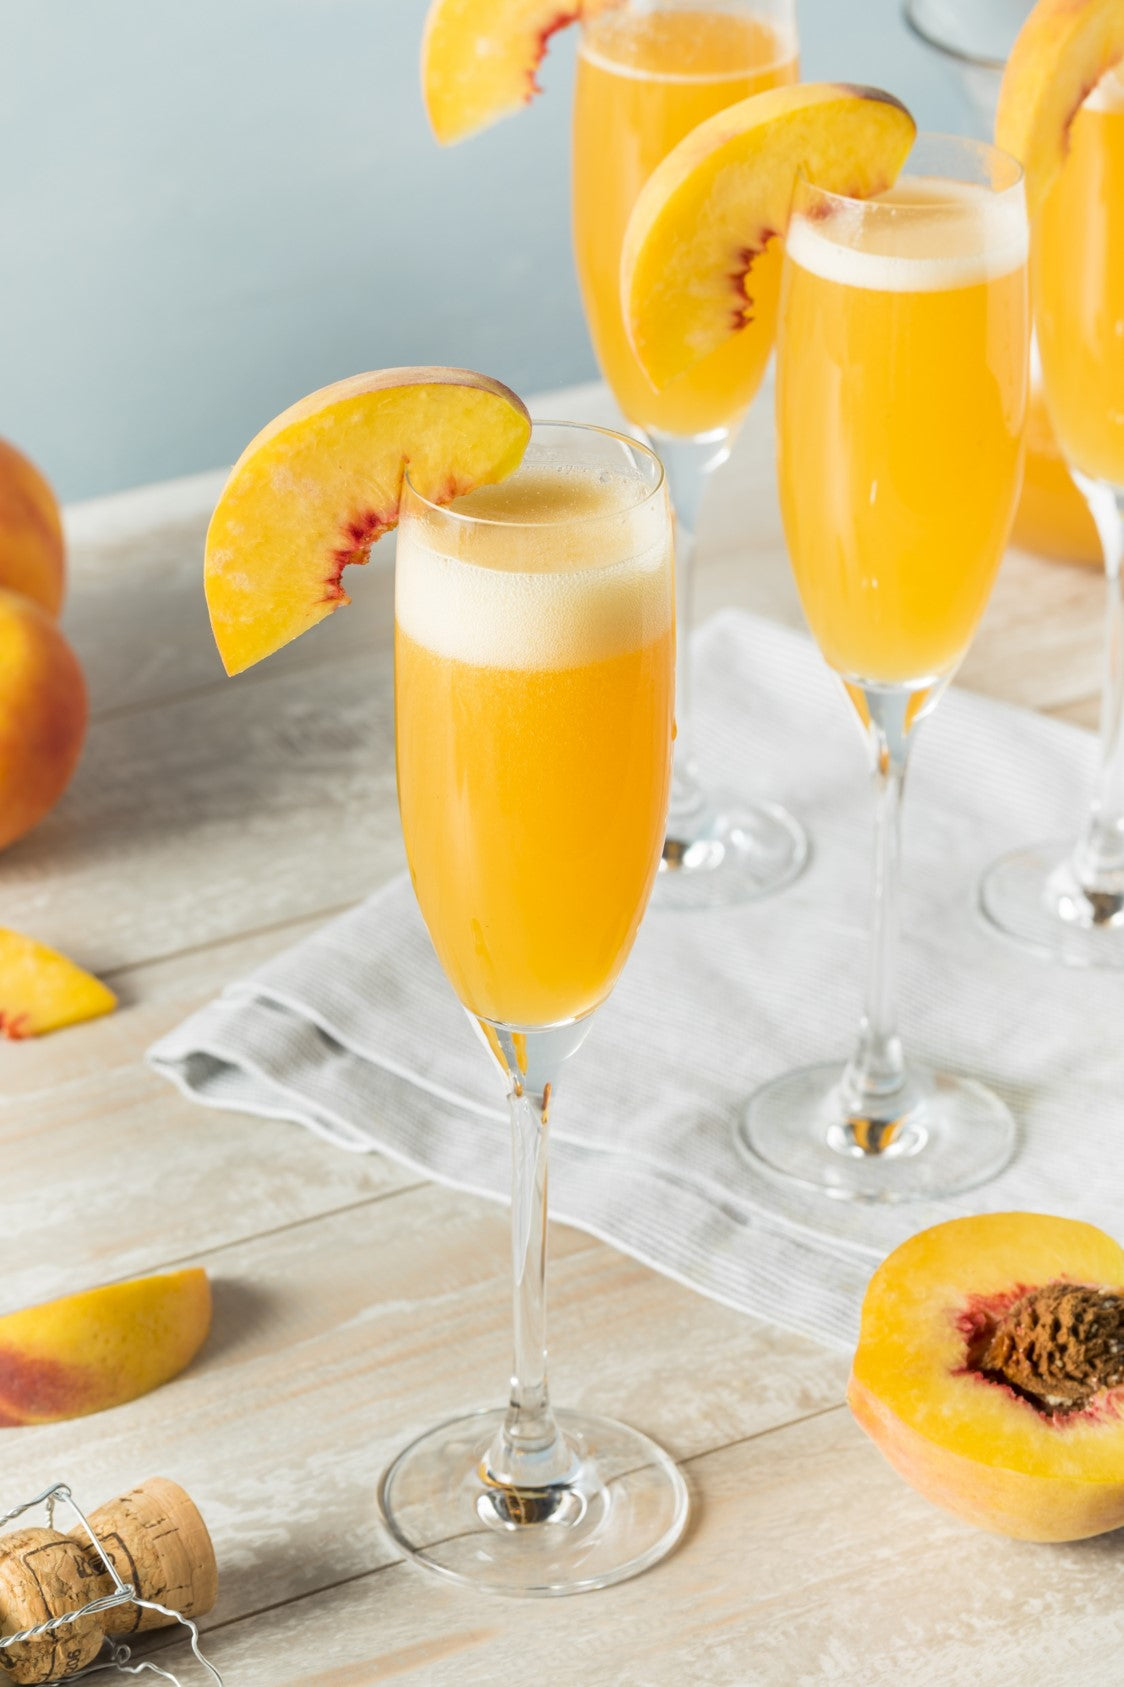 Bellini Cocktail Recipe with Bols Peach Products at Brunch